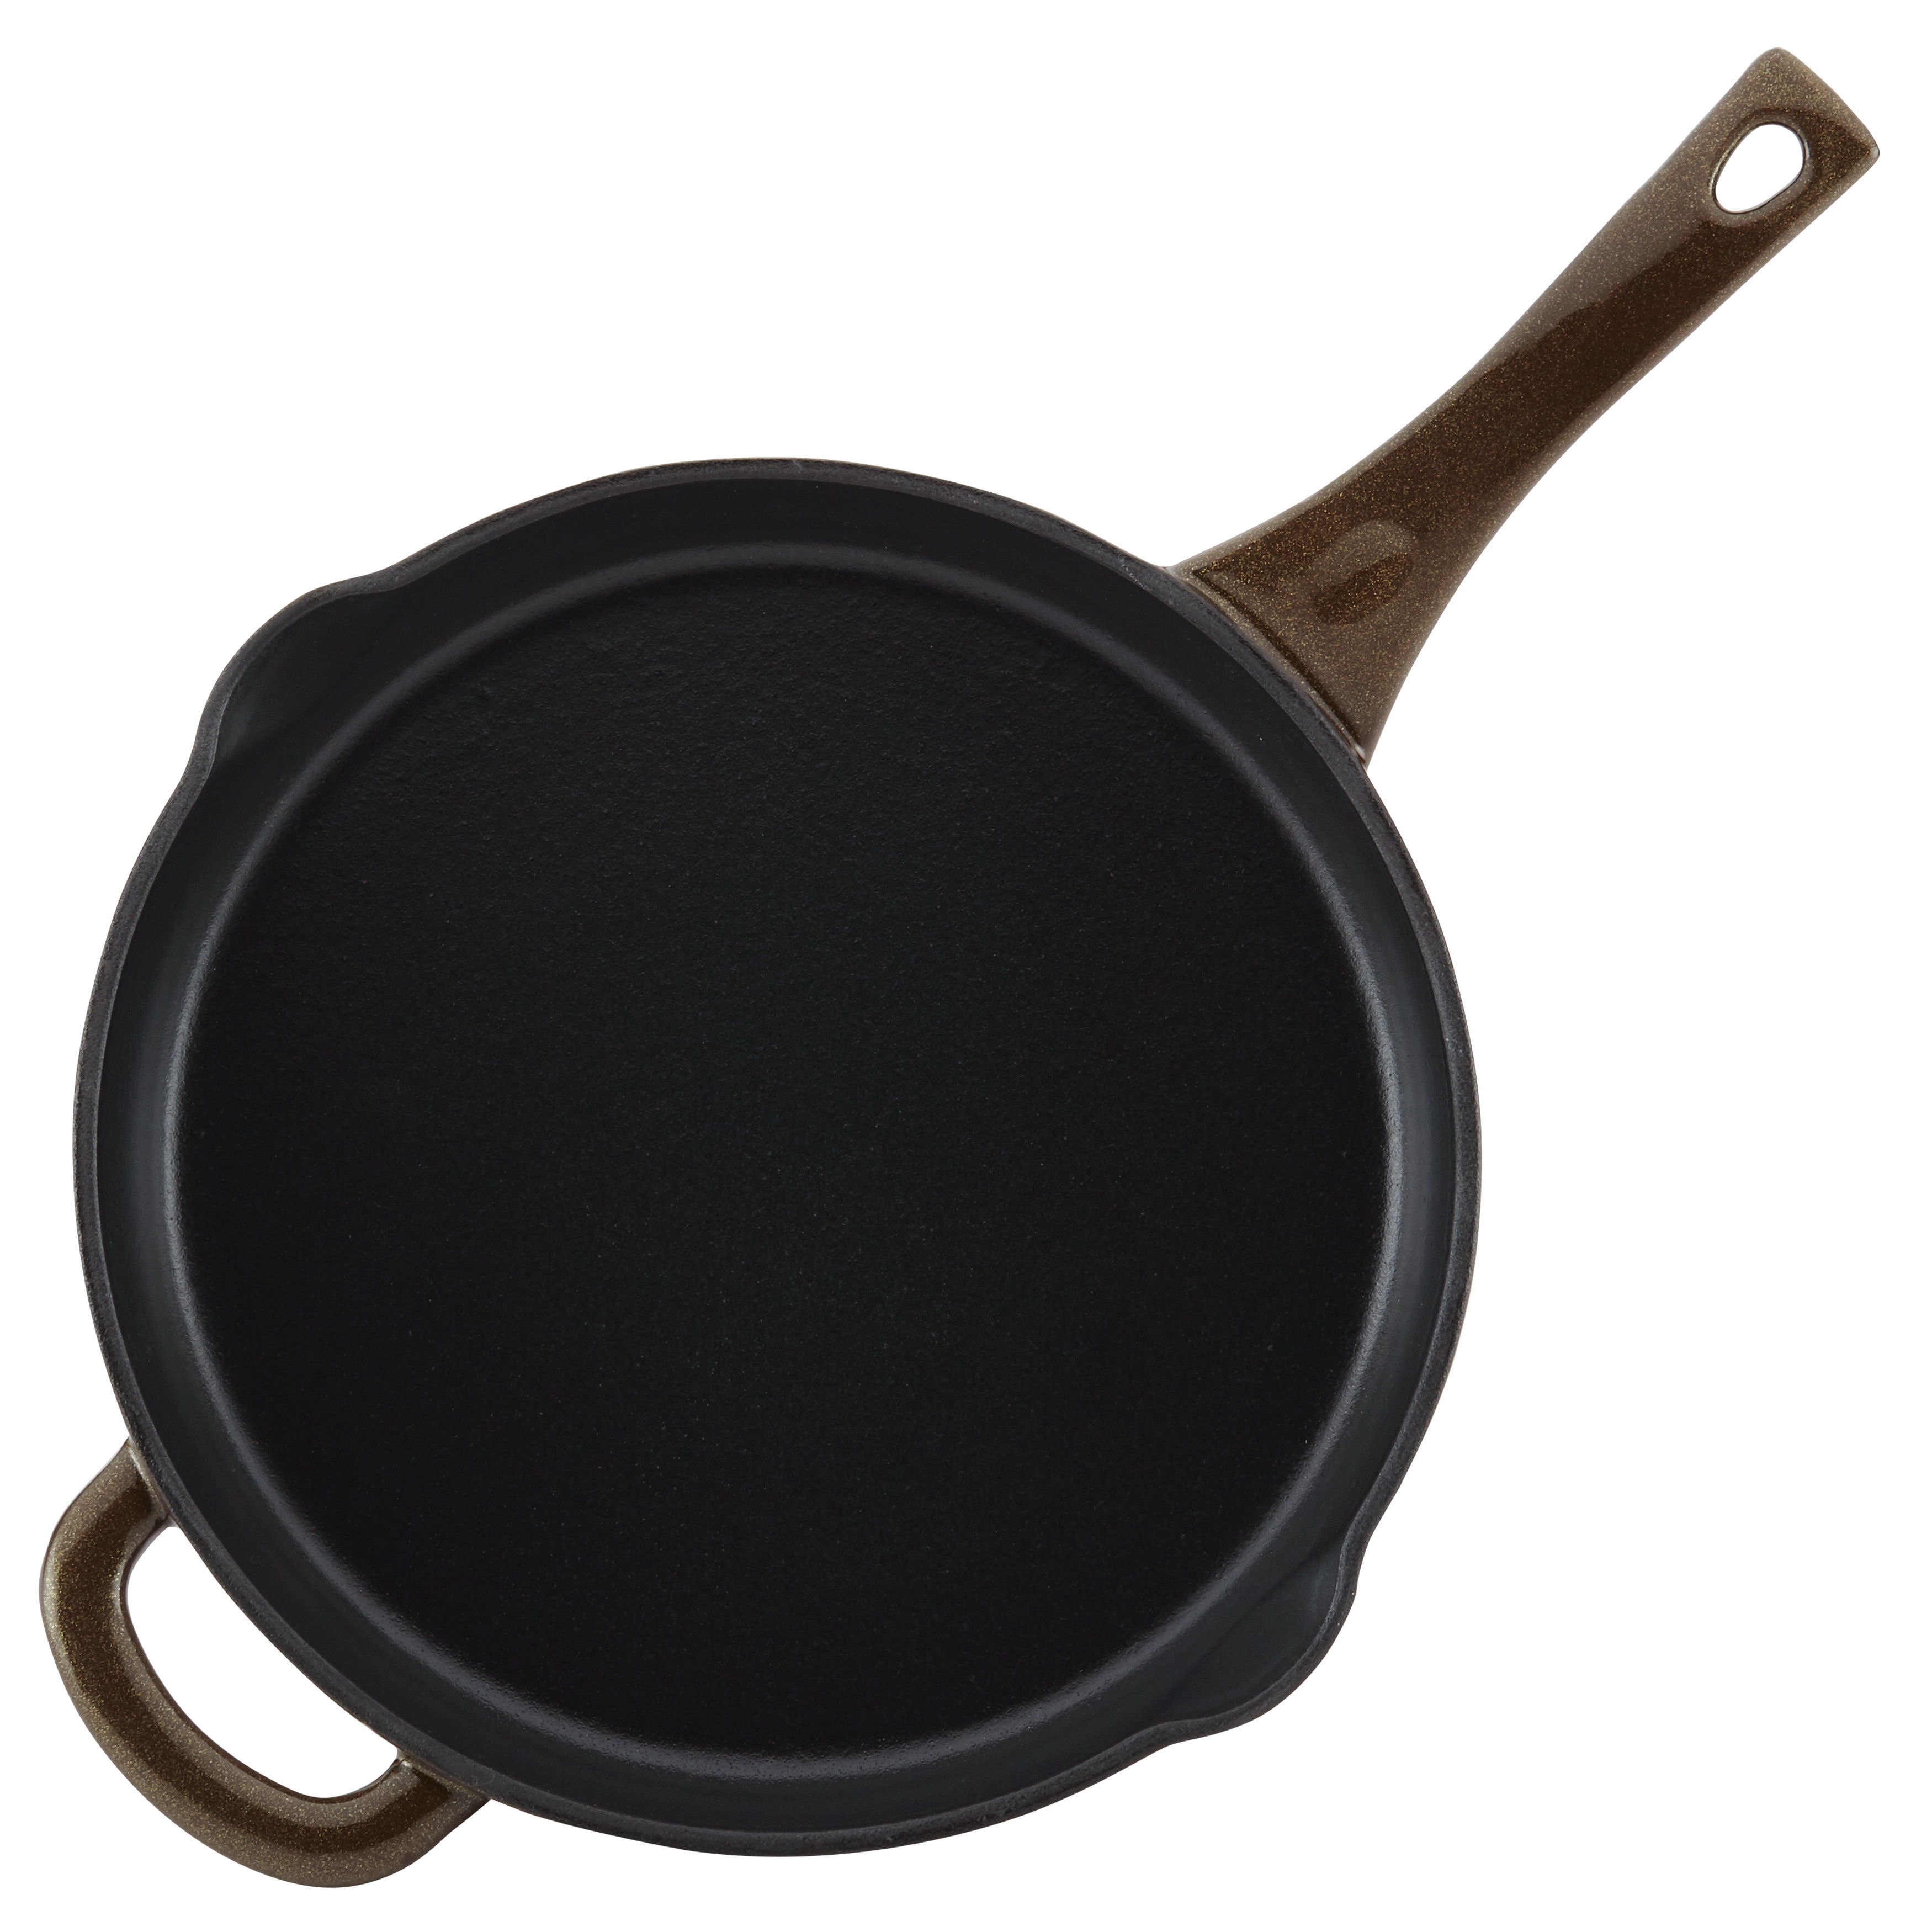 https://ak1.ostkcdn.com/images/products/20005408/Ayesha-Curry-Cast-Iron-Enamel-Skillet-with-Pour-Spouts-10-Inch-71aeee72-dc21-4f1d-ad88-a17cd926f53e.jpg